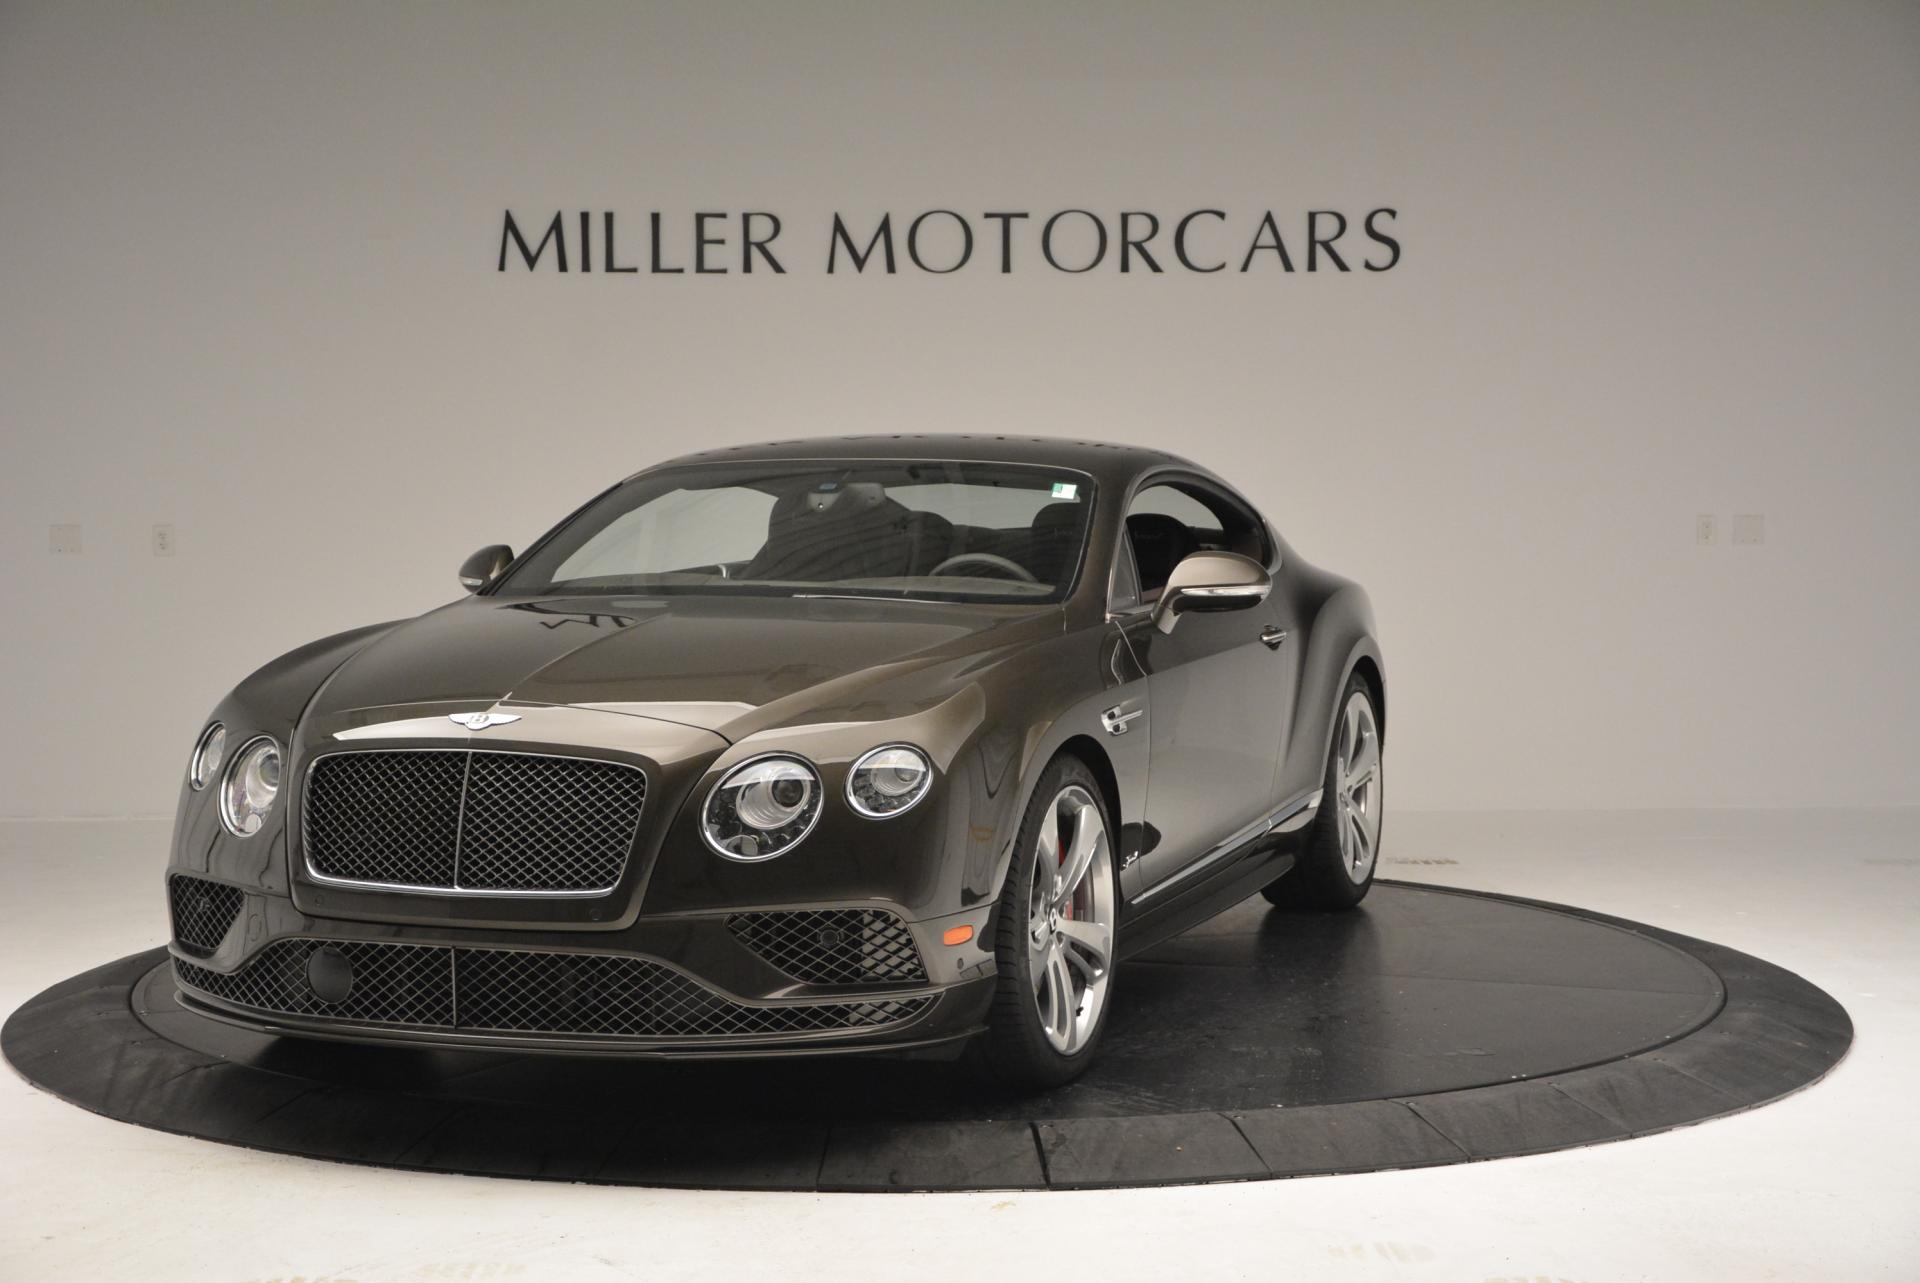 Used 2016 Bentley Continental GT Speed for sale Sold at Maserati of Westport in Westport CT 06880 1